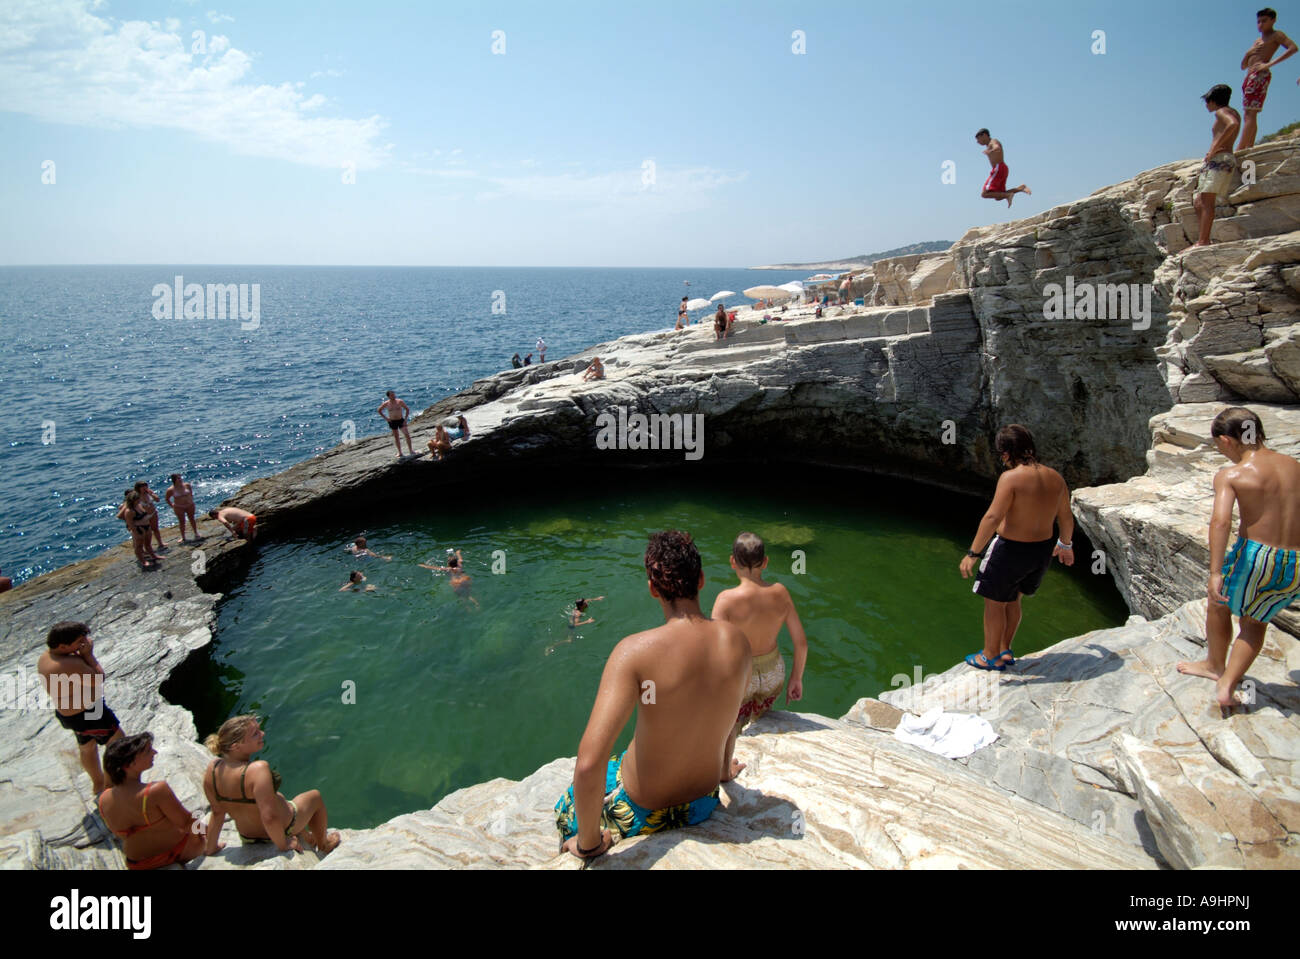 Holidaymakers sitting on the rocks around a natural circular pool beside the sea watching a boy jumping in. Stock Photo